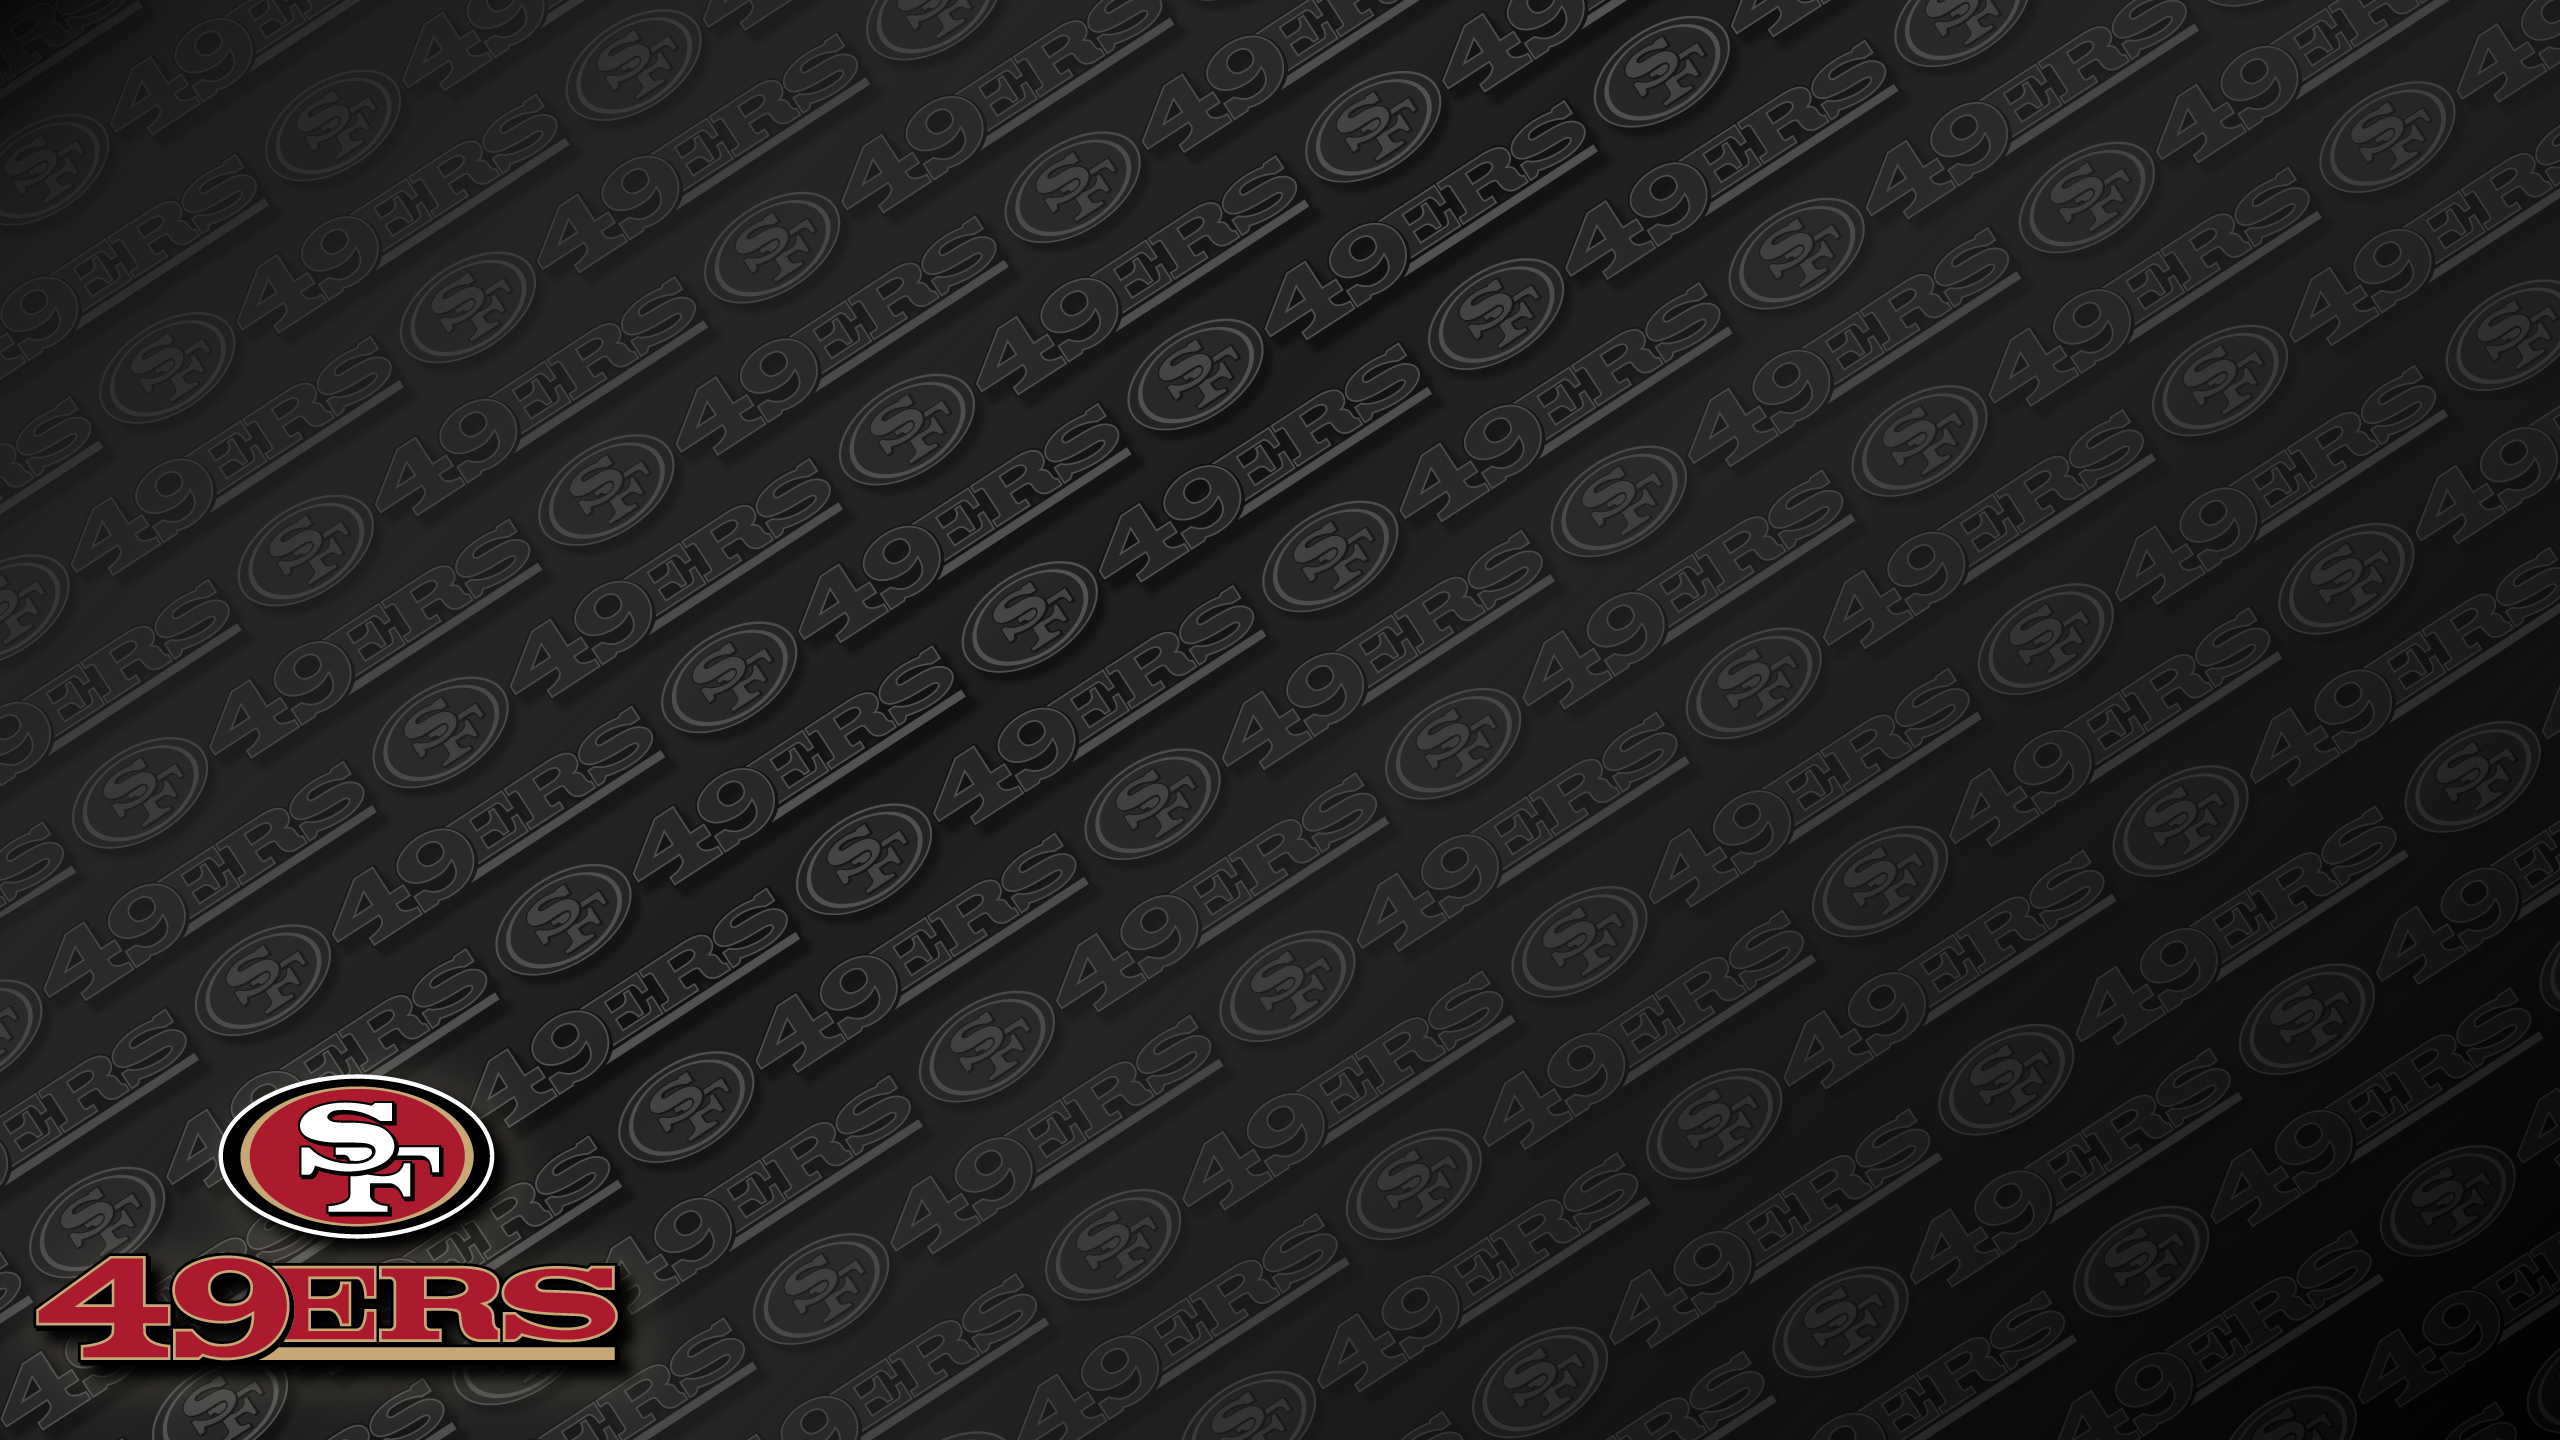 I made a couple of new wallpaper over the weekend; a QHD Desktop